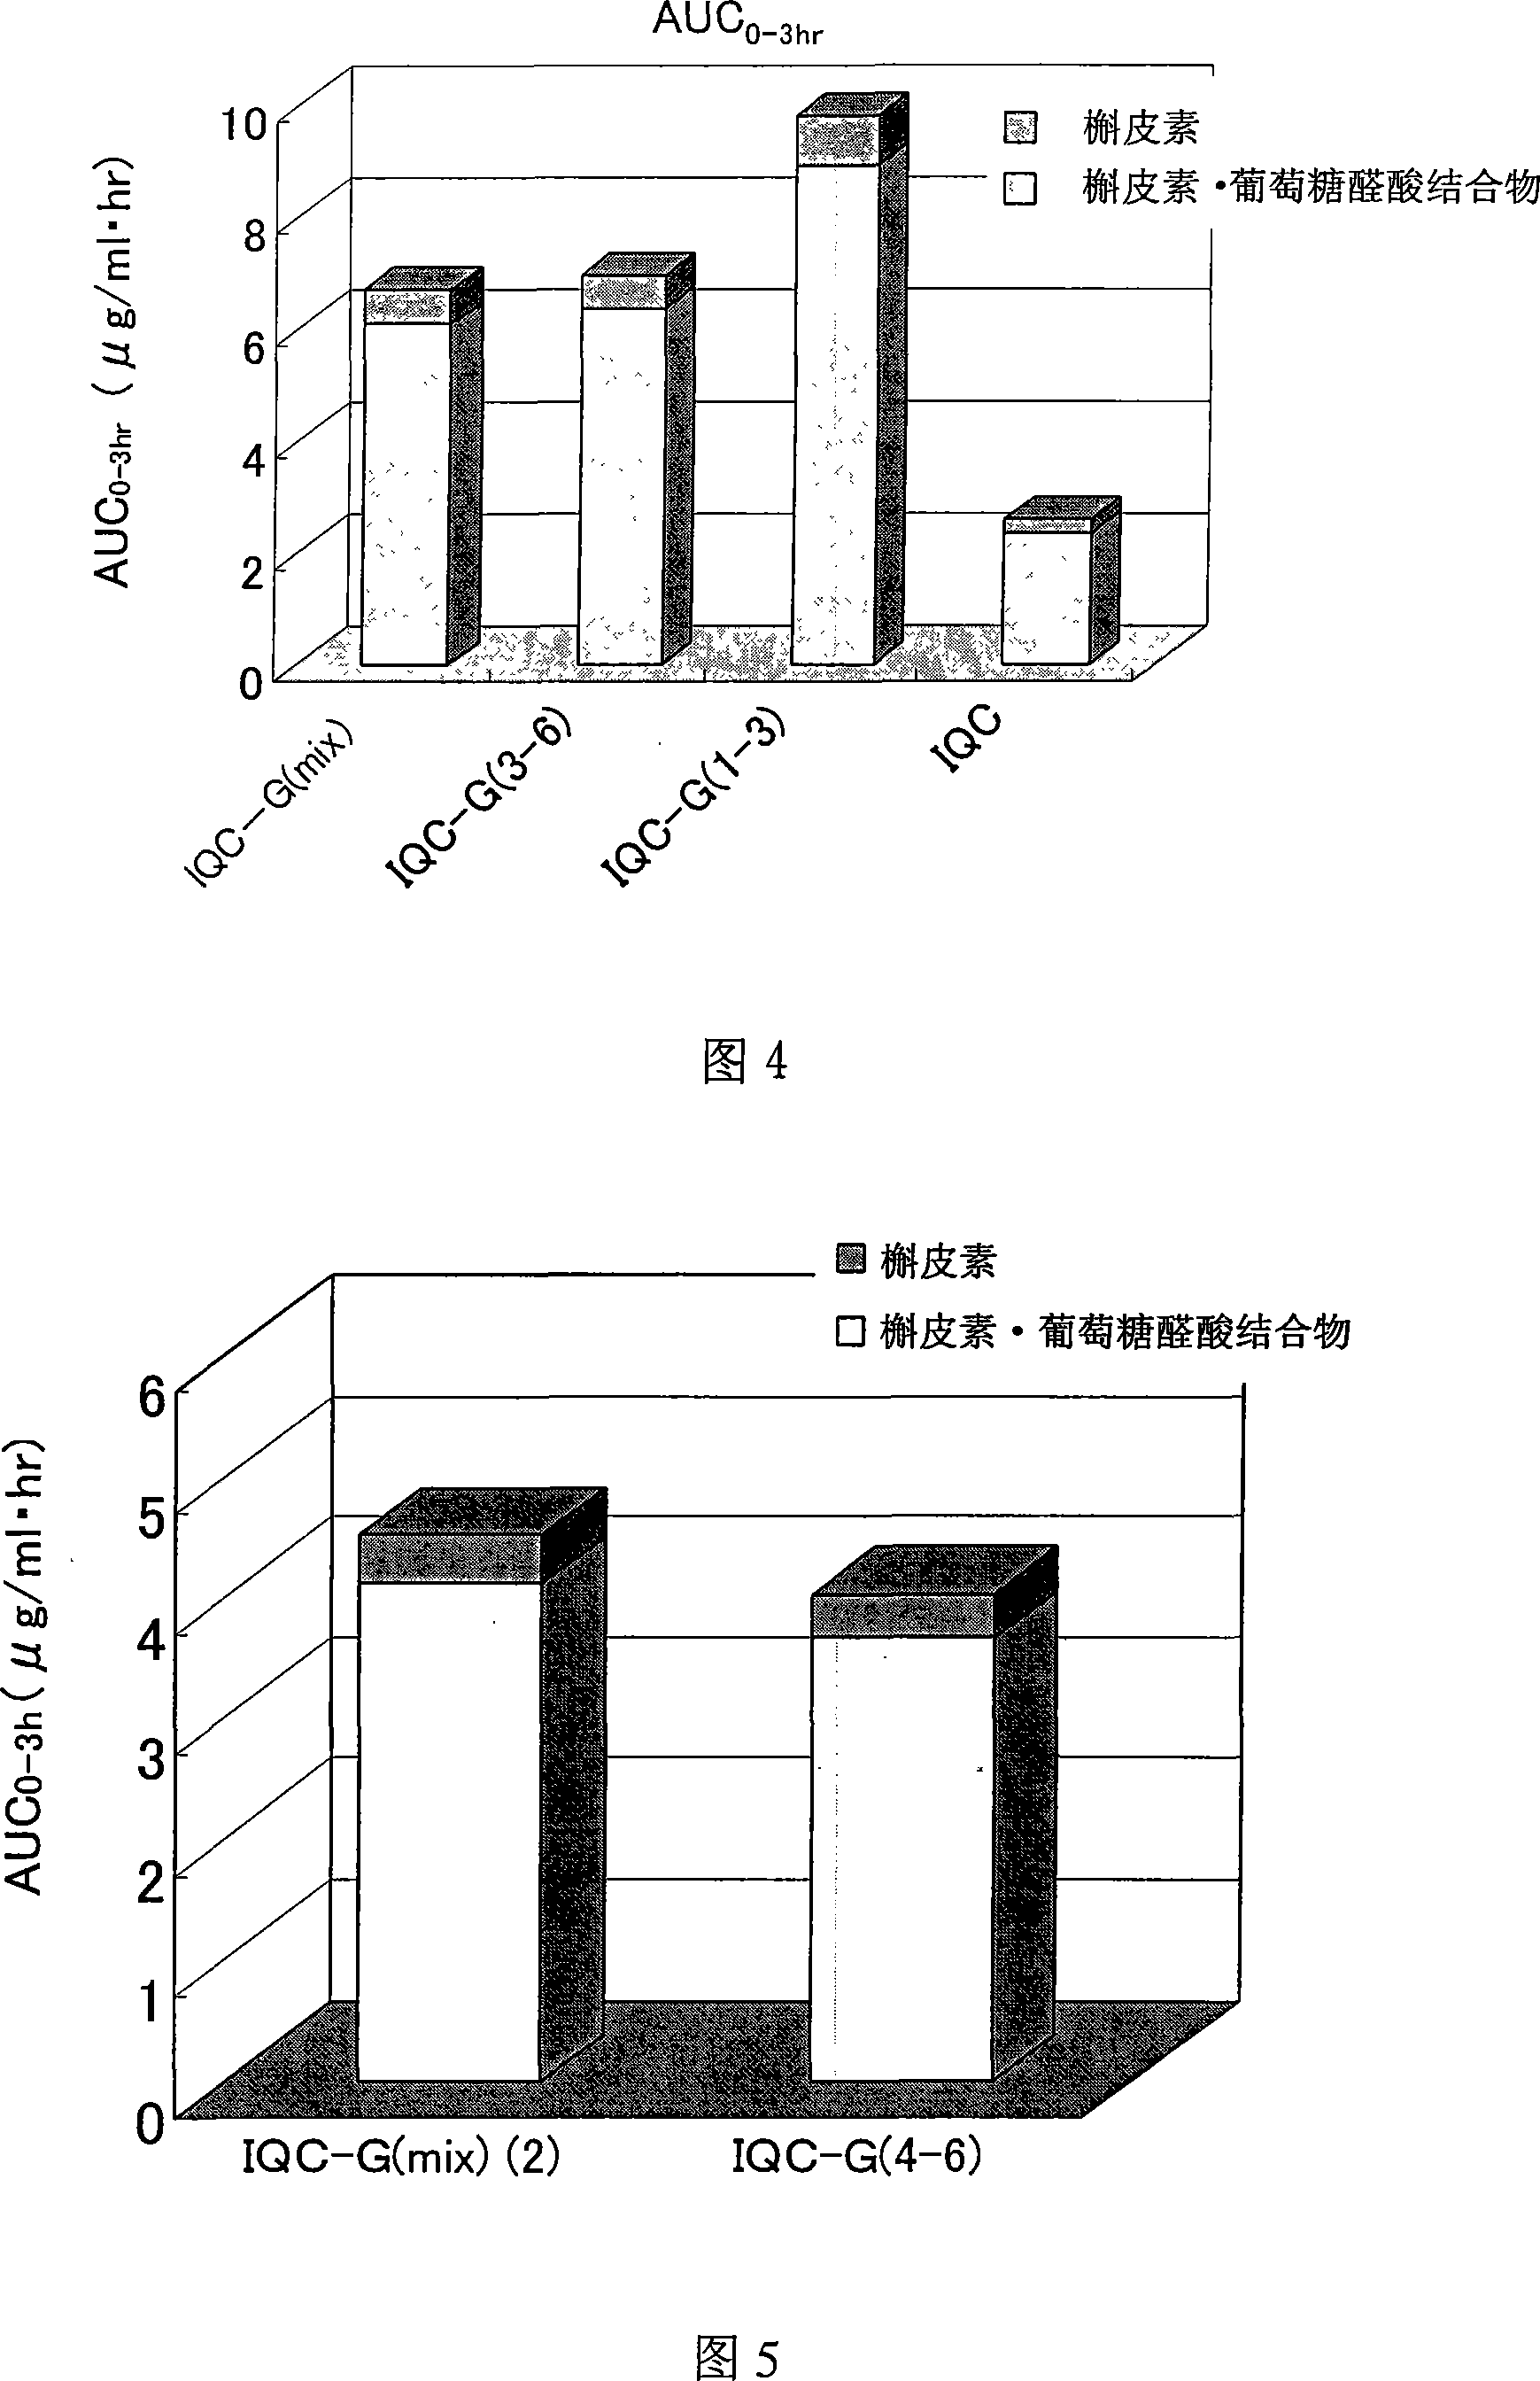 Quercetin glycoside composition and method of preparing the same